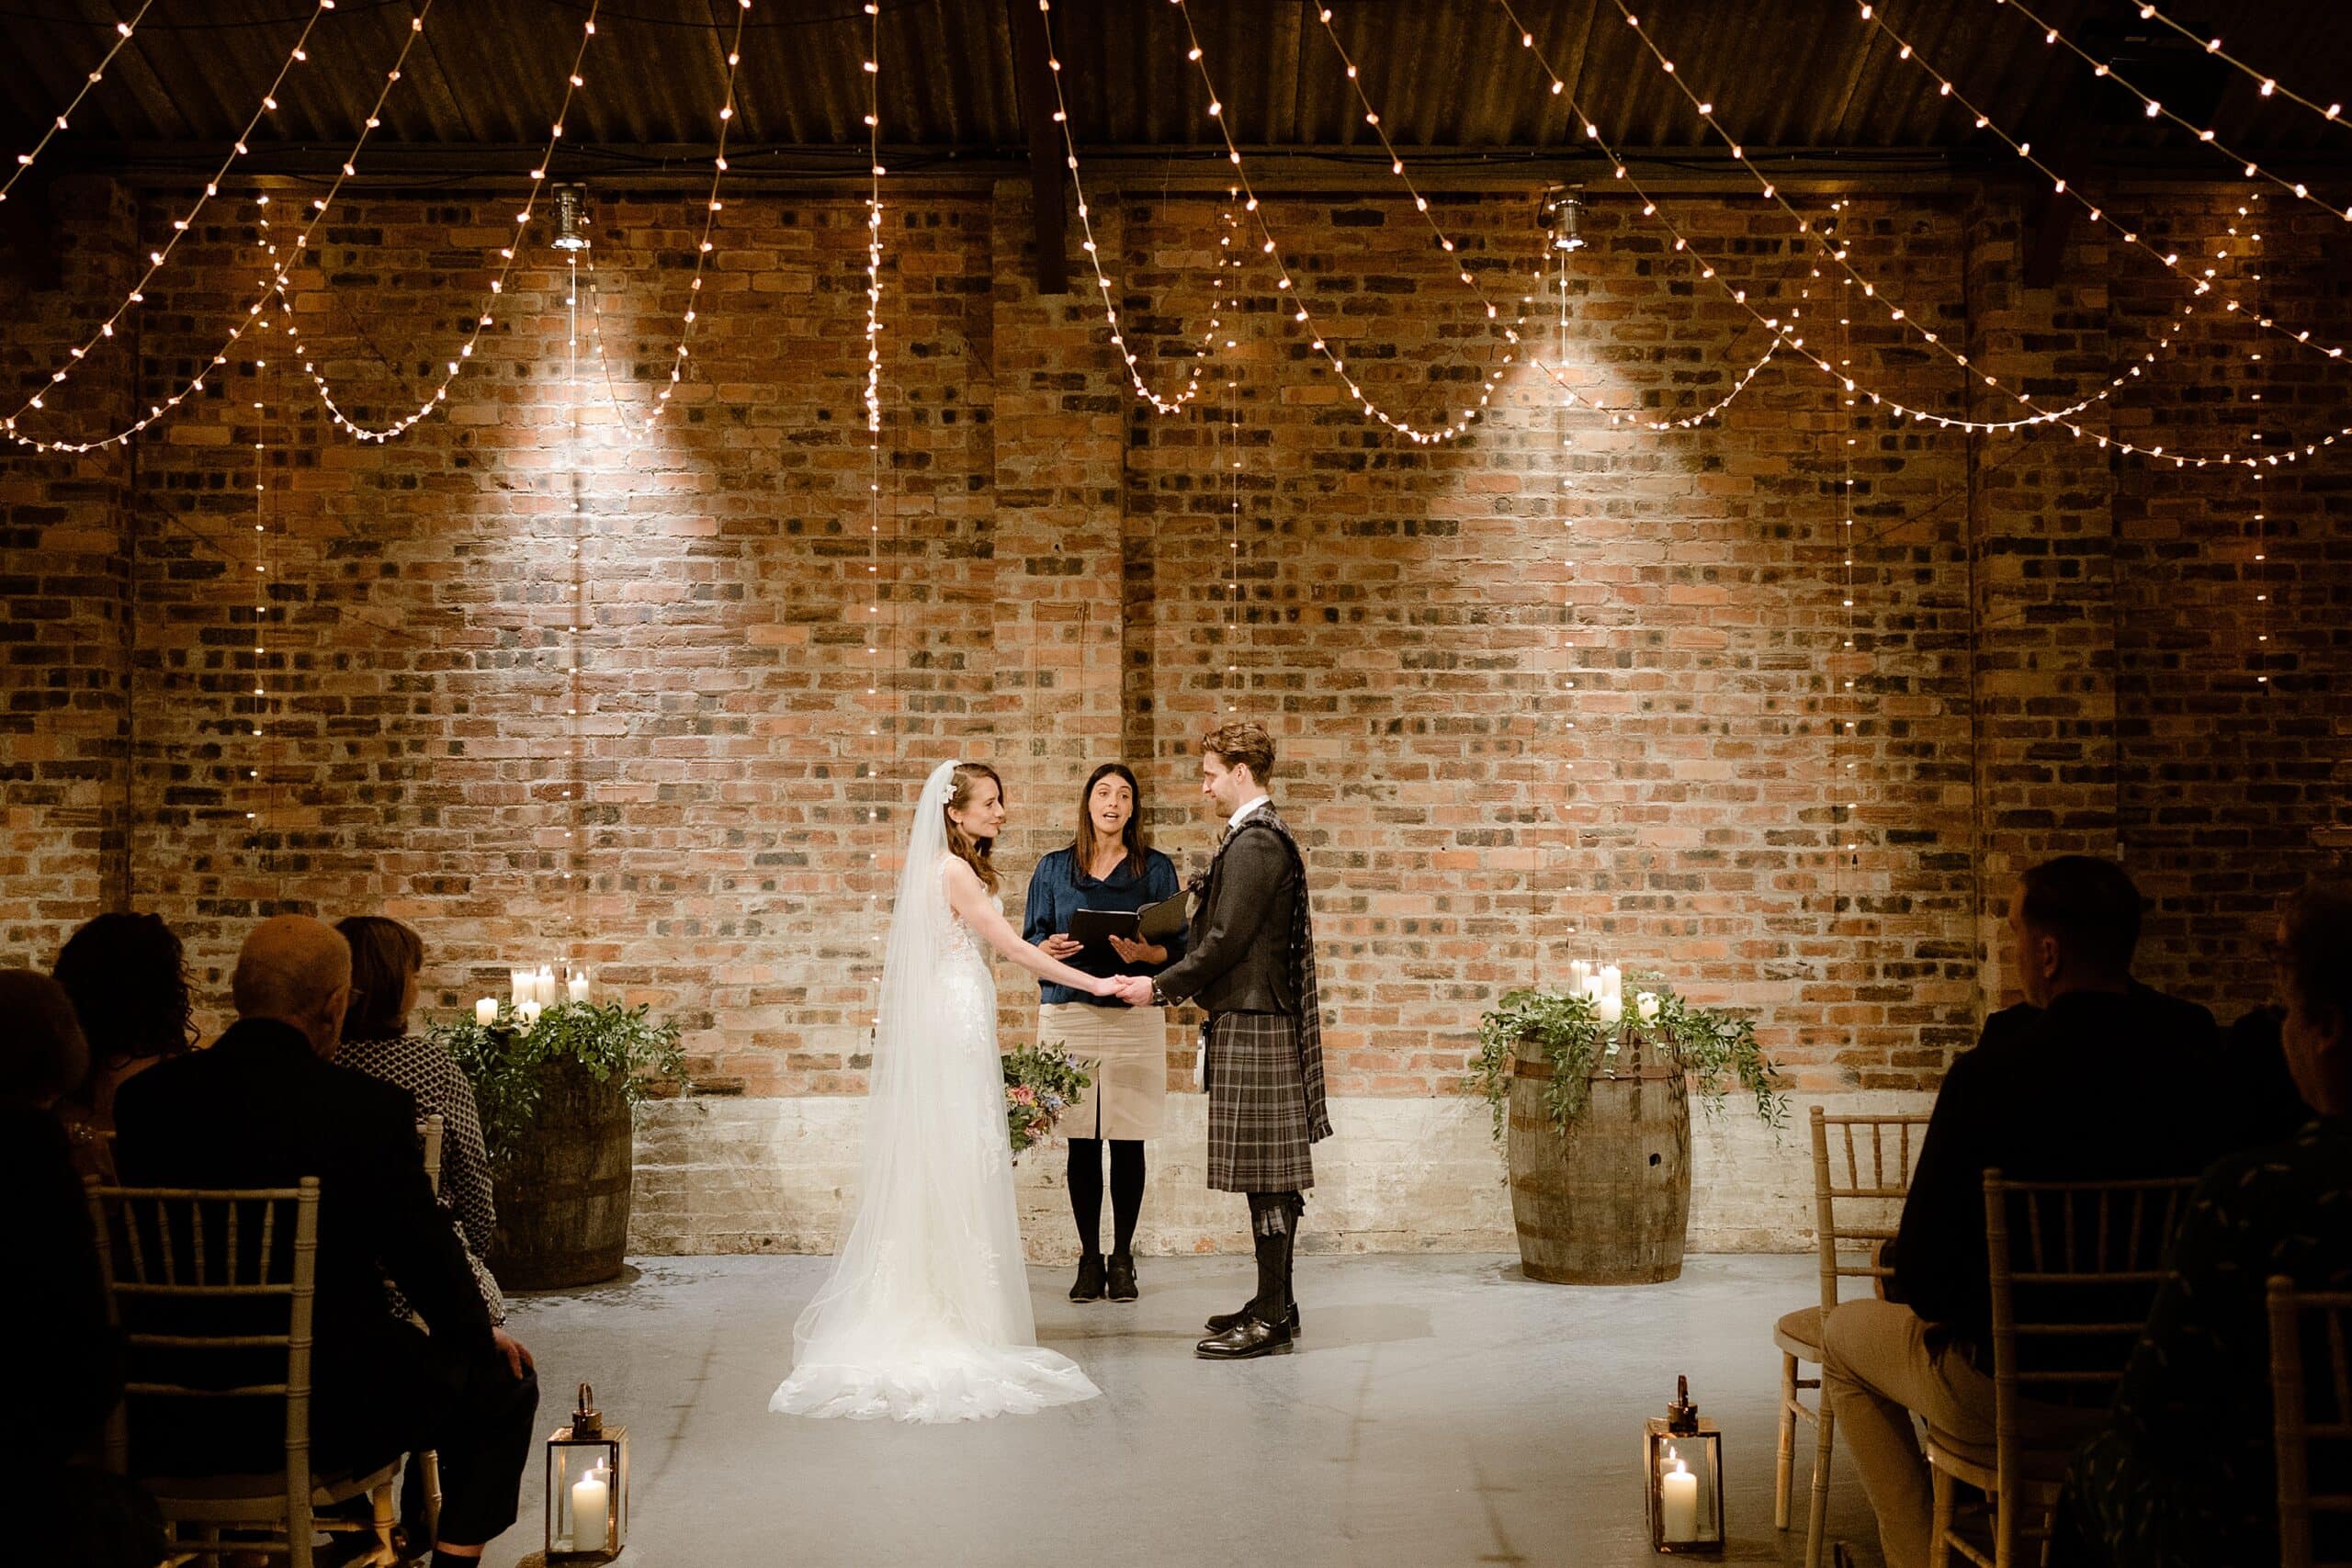 the bride and groom hold hands as celebrant conducts wedding ceremony in front of red brick wall and under festoon lights while seated guests watch at a barn wedding in st andrews scotland